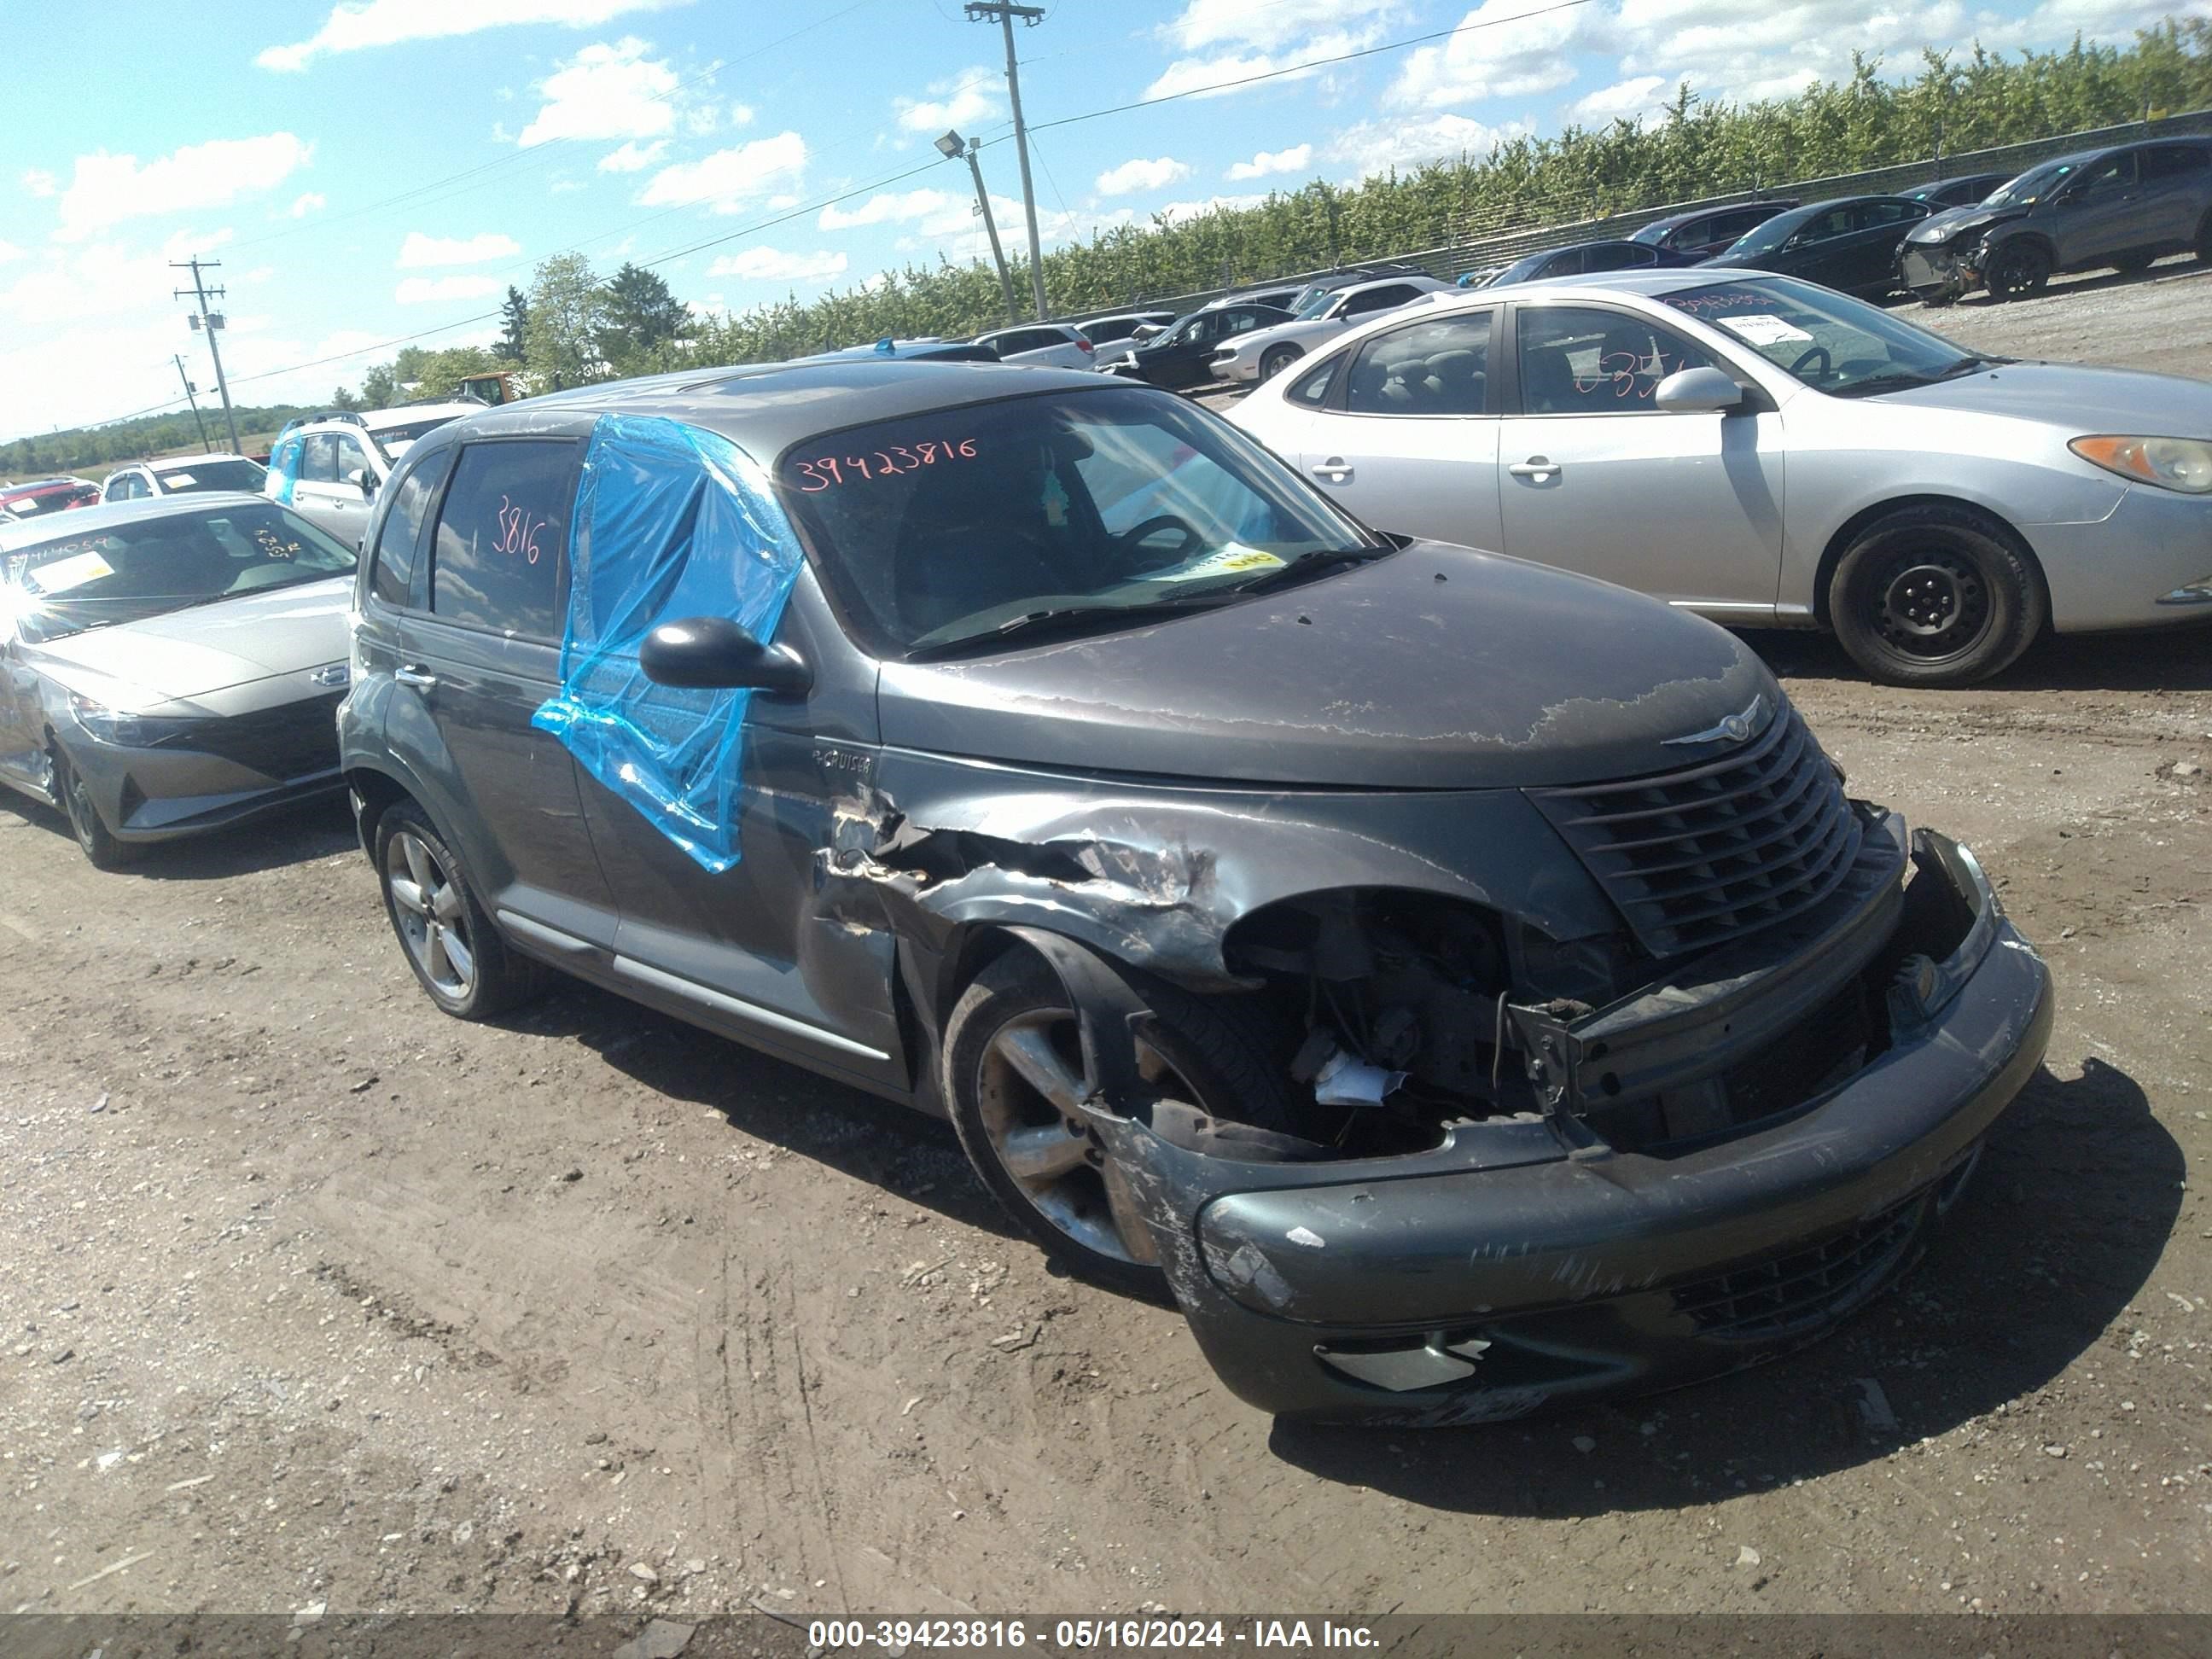 vin: 3C8FY78G63T517340 3C8FY78G63T517340 2003 chrysler pt cruiser 2400 for Sale in 17372, 10 Auction Drive, Latimore Township, Pennsylvania, USA